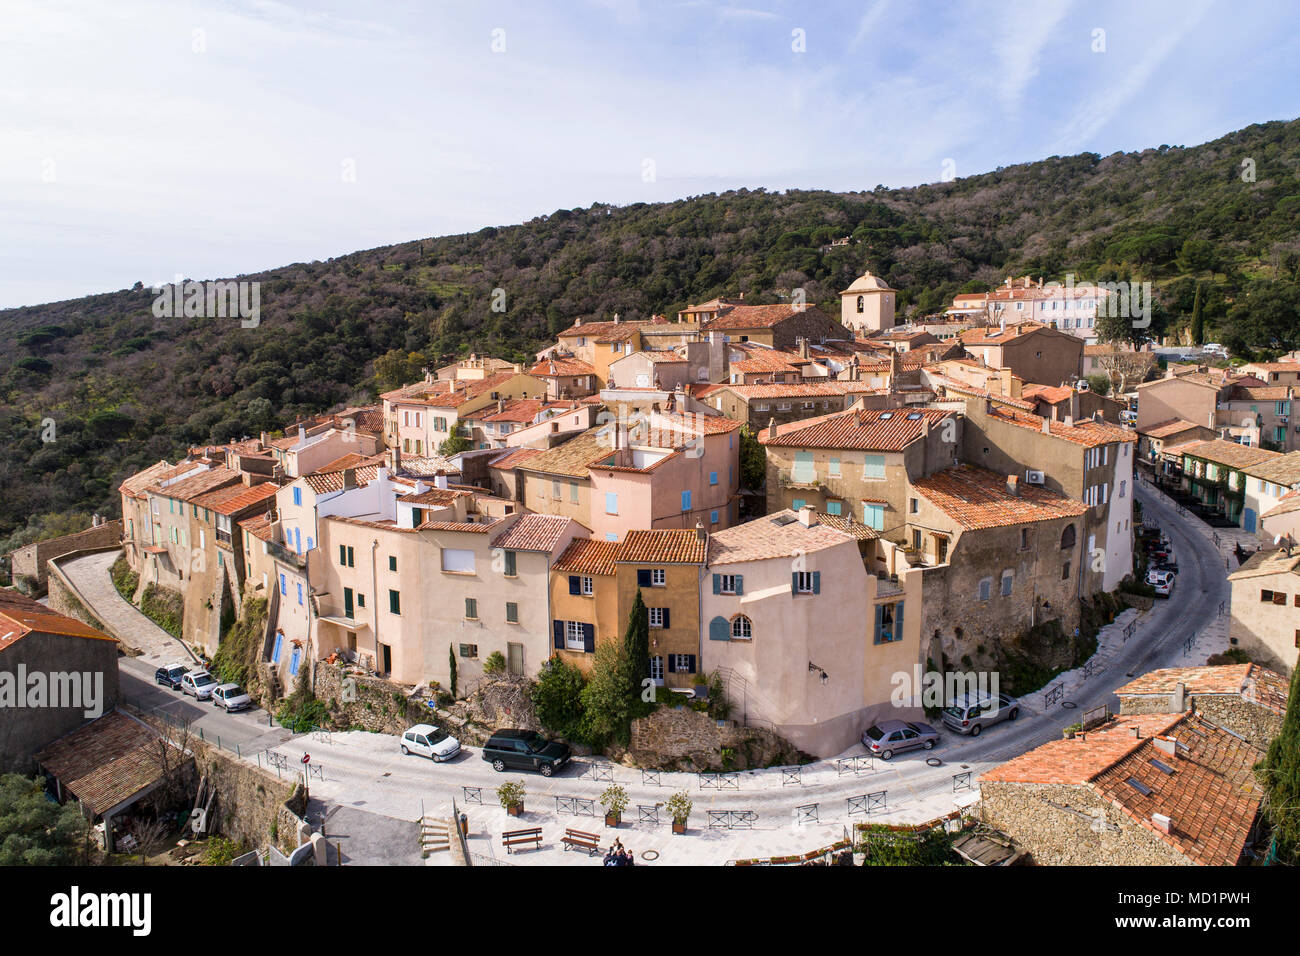 Aerial view of Ramatuelle, Famous Typical village in the south of France Stock Photo